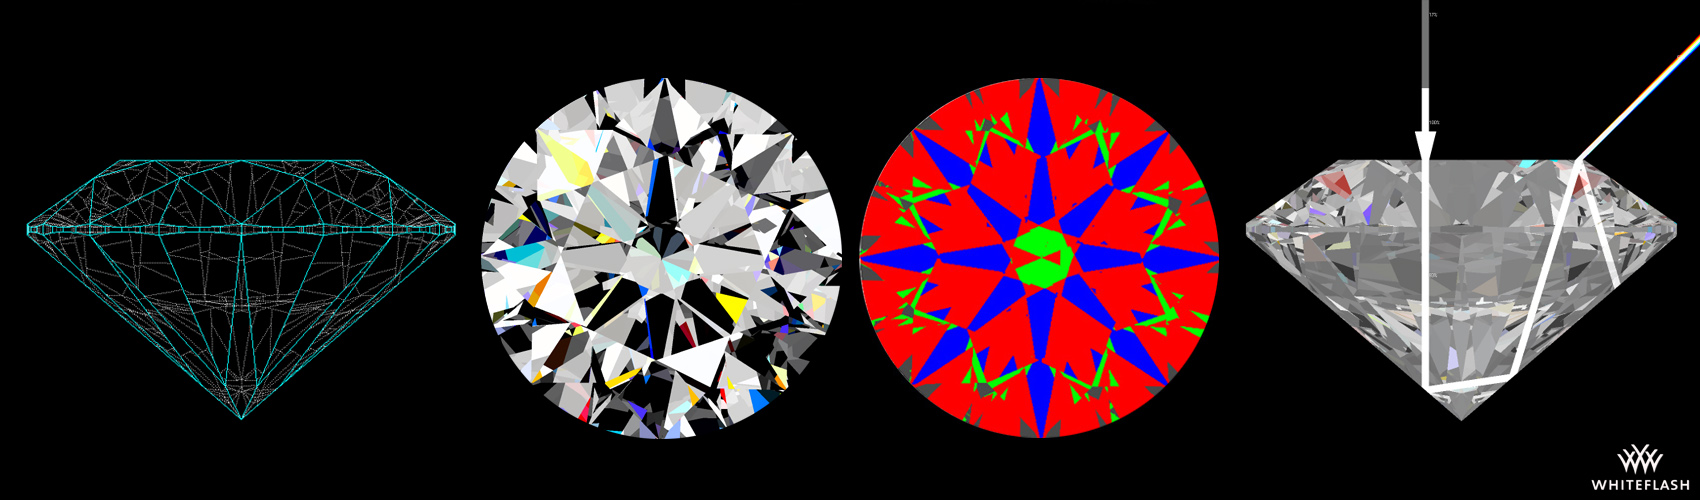 Computer Generated Diamond Images